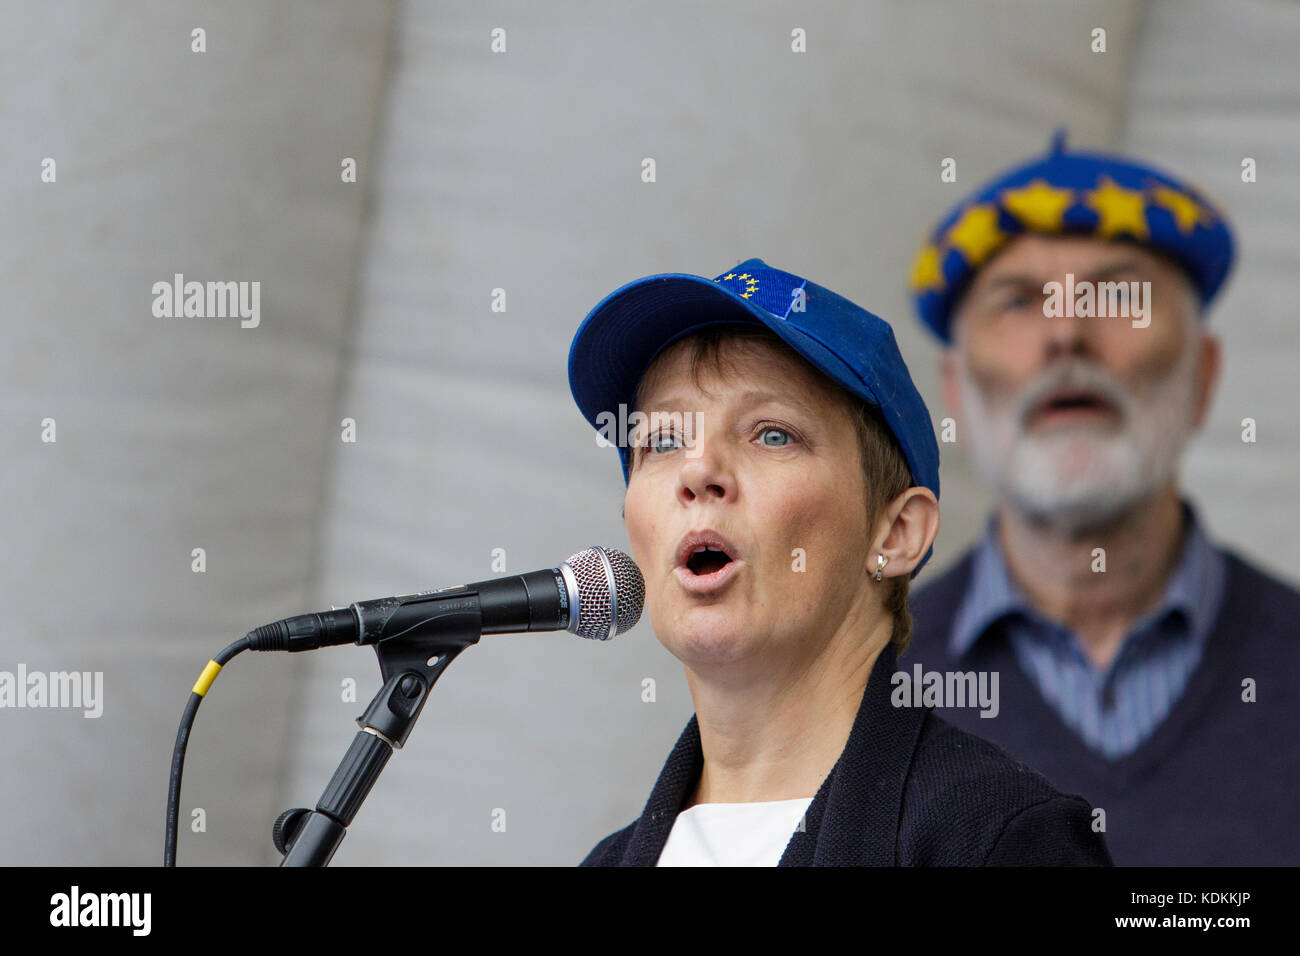 Bristol, UK, 14th October, 2017. Clare Moody Labour MEP for South West England & Gibraltar is pictured as she talks to Pro EU supporters at an anti Brexit protest rally in College Green. The rally was held to allow people to show their support for the UK remaining part of the European Union and to celebrate the South-West and Gibraltar  European Parliament Constituency and the benefits that the region enjoys as part of the European Union. Stock Photo